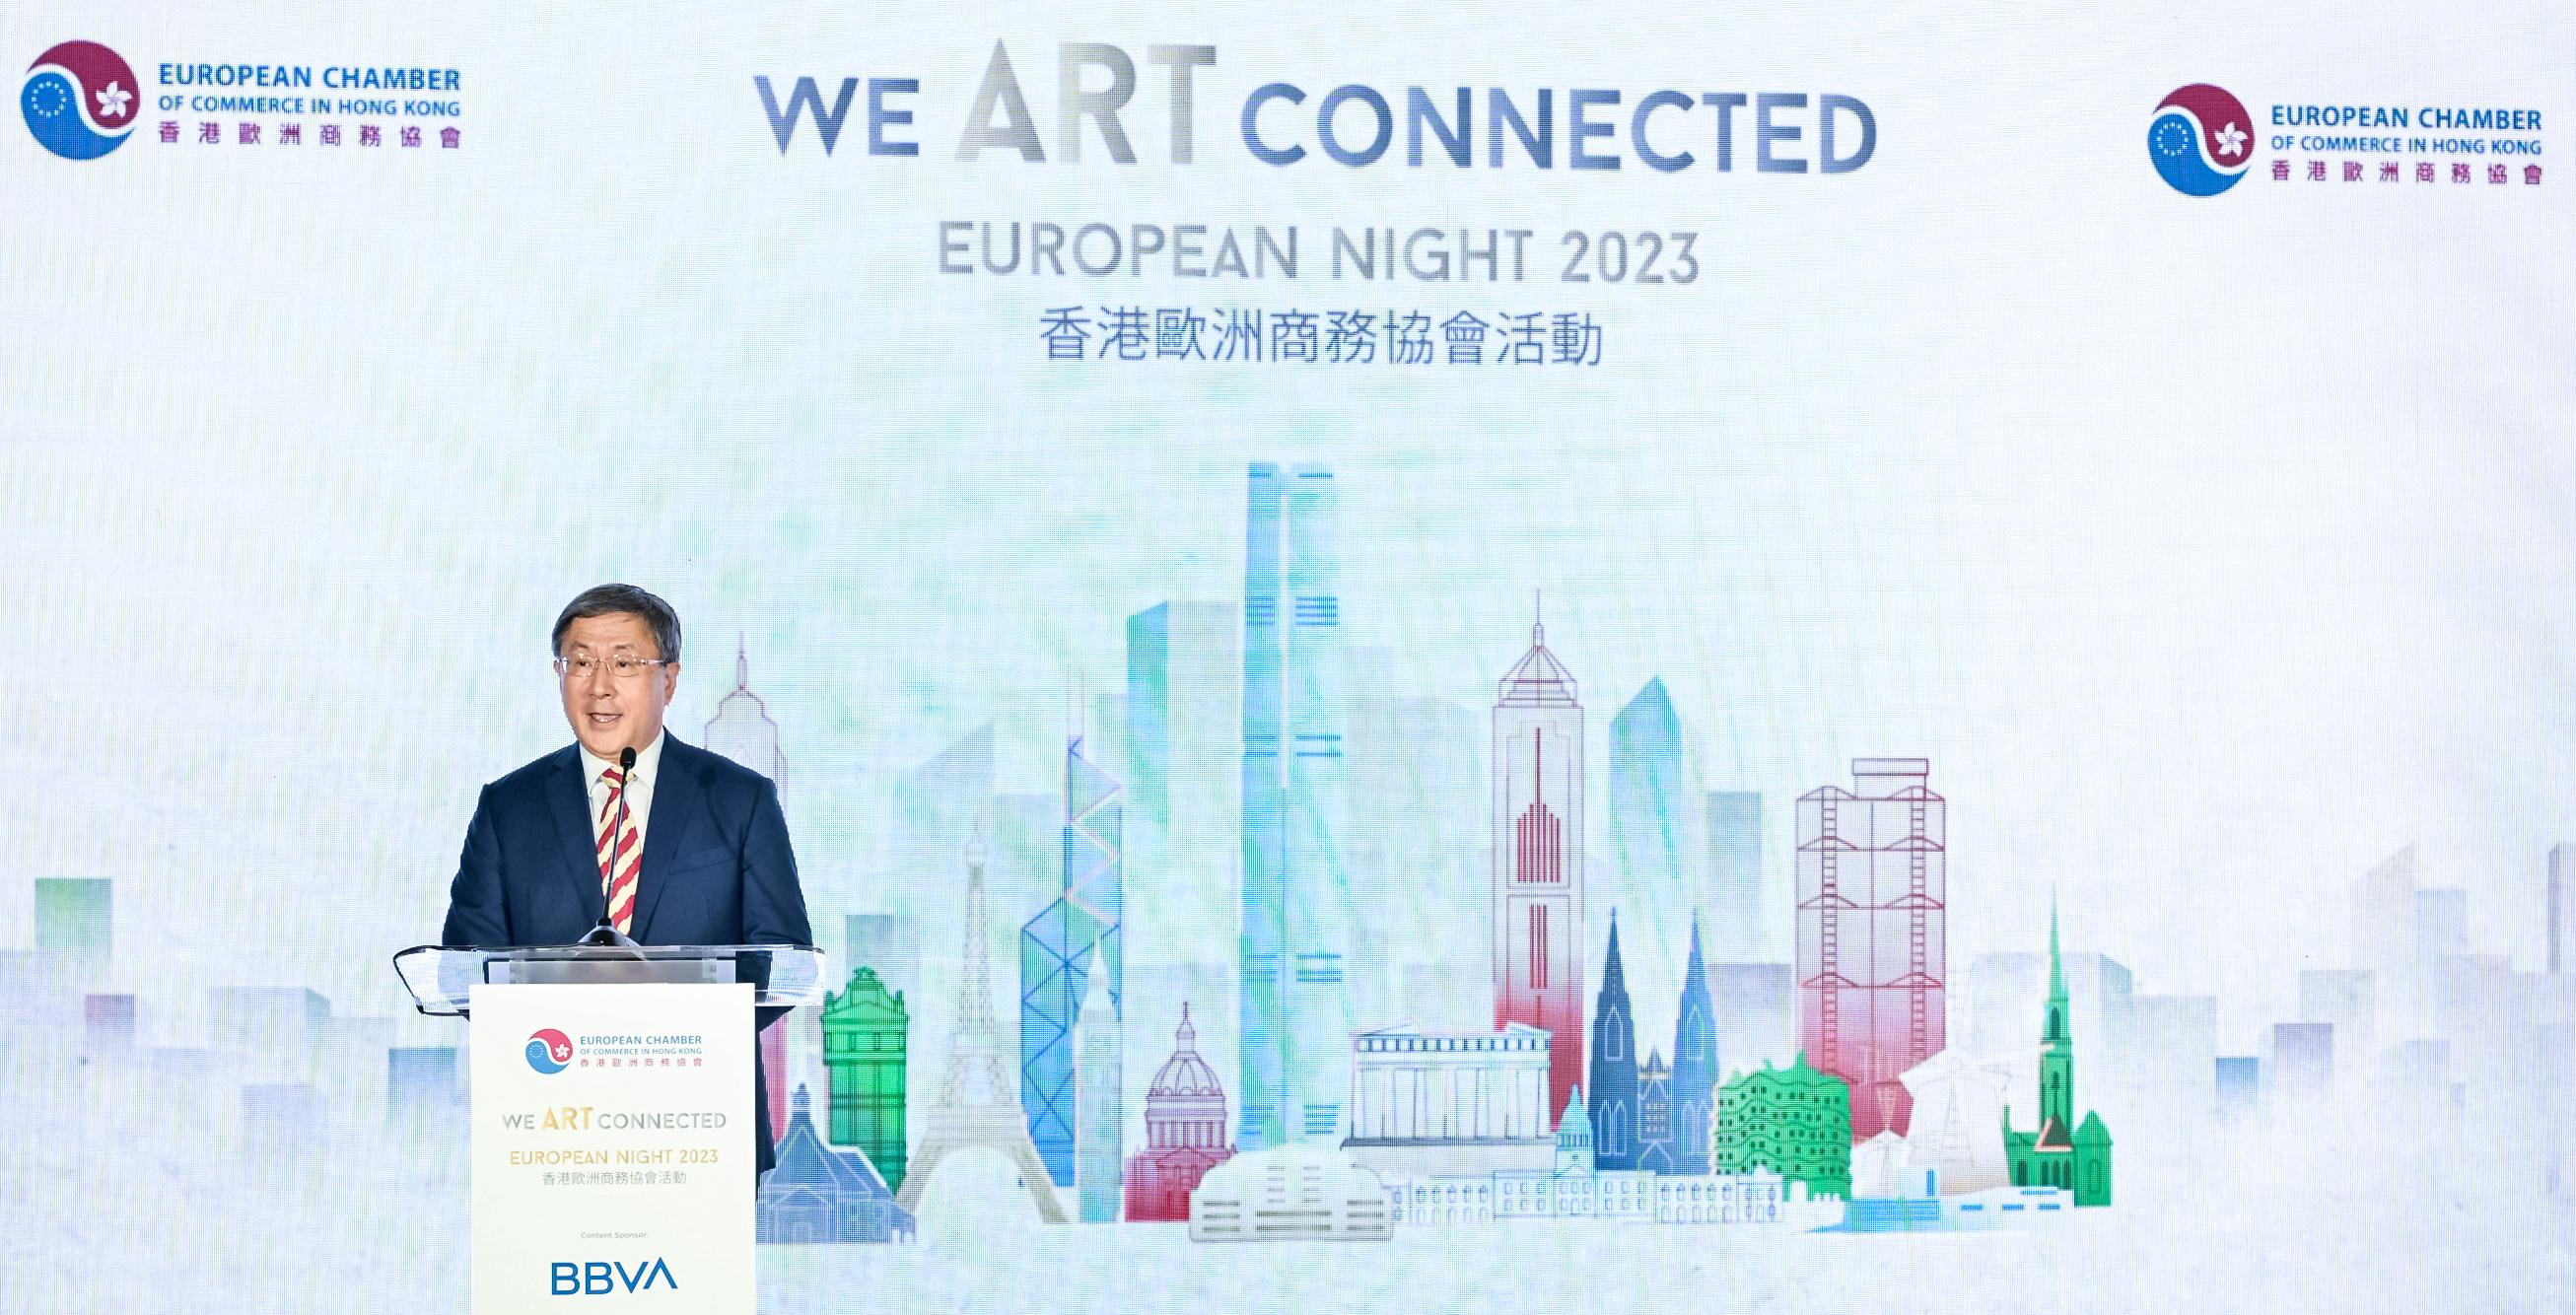 The Deputy Chief Secretary for Administration, Mr Cheuk Wing-hing, delivers a speech at the European Night 2023 organised by the European Chamber of Commerce in Hong Kong tonight (September 25).